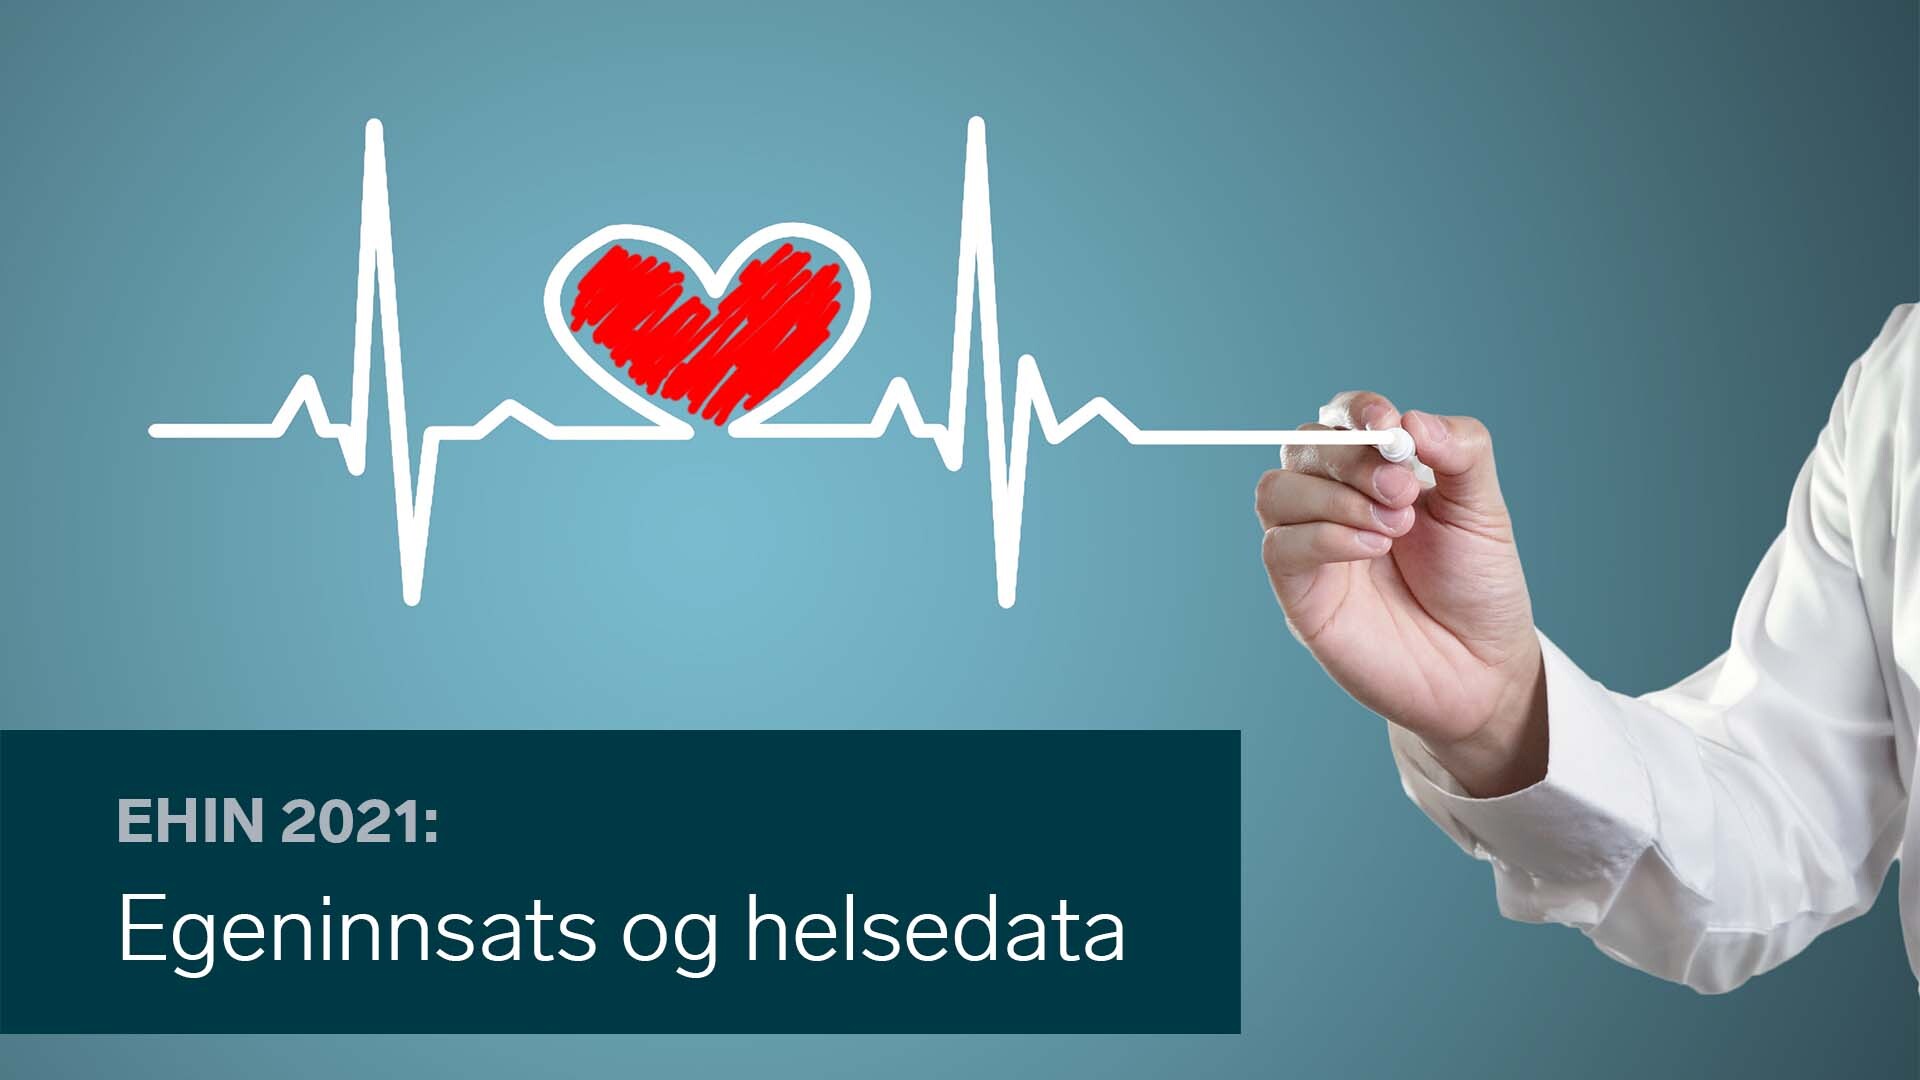 Patients' own efforts when using their own health data